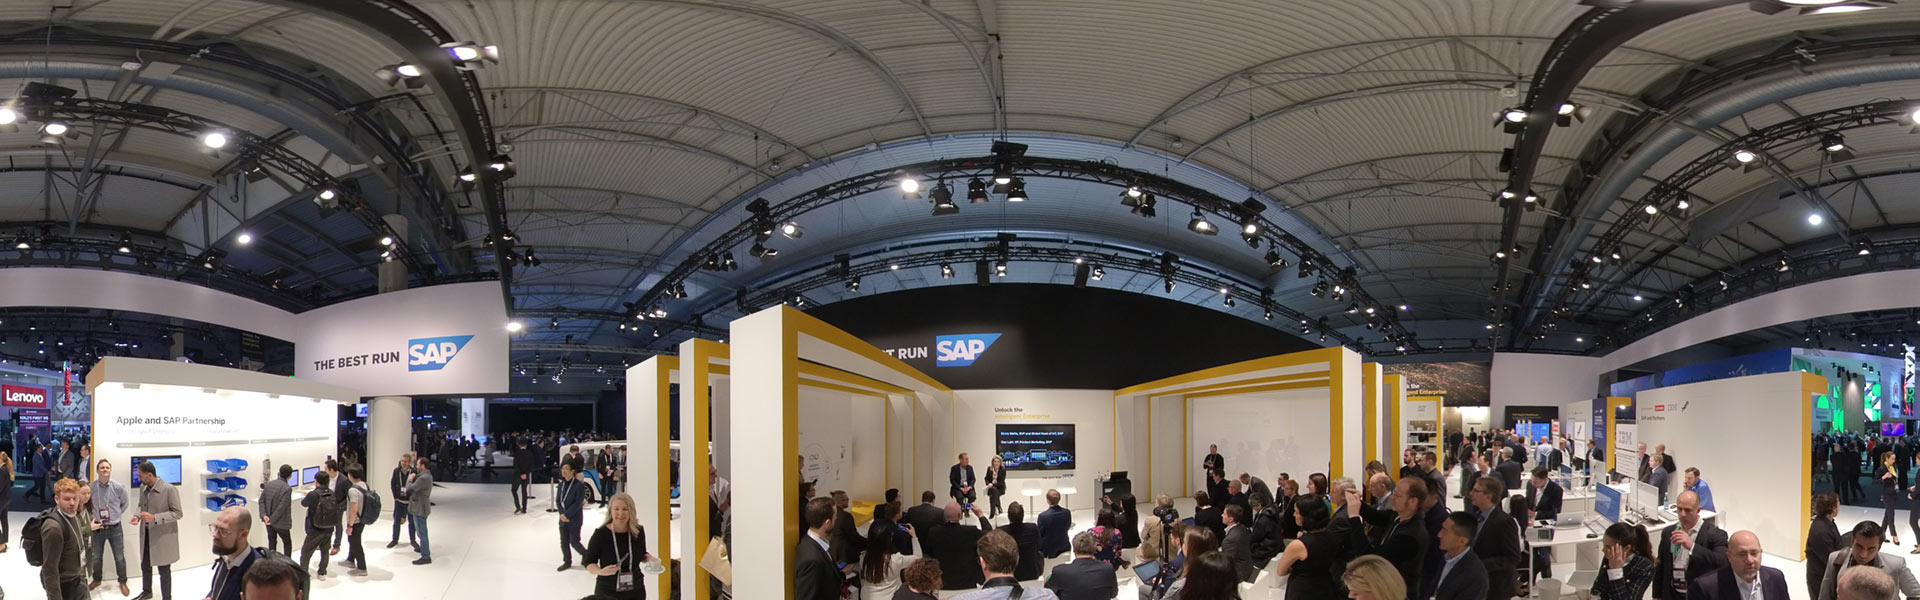 At MWC19, SAP Shows How to Unlock the Intelligent Enterprise to Deliver Business Outcomes